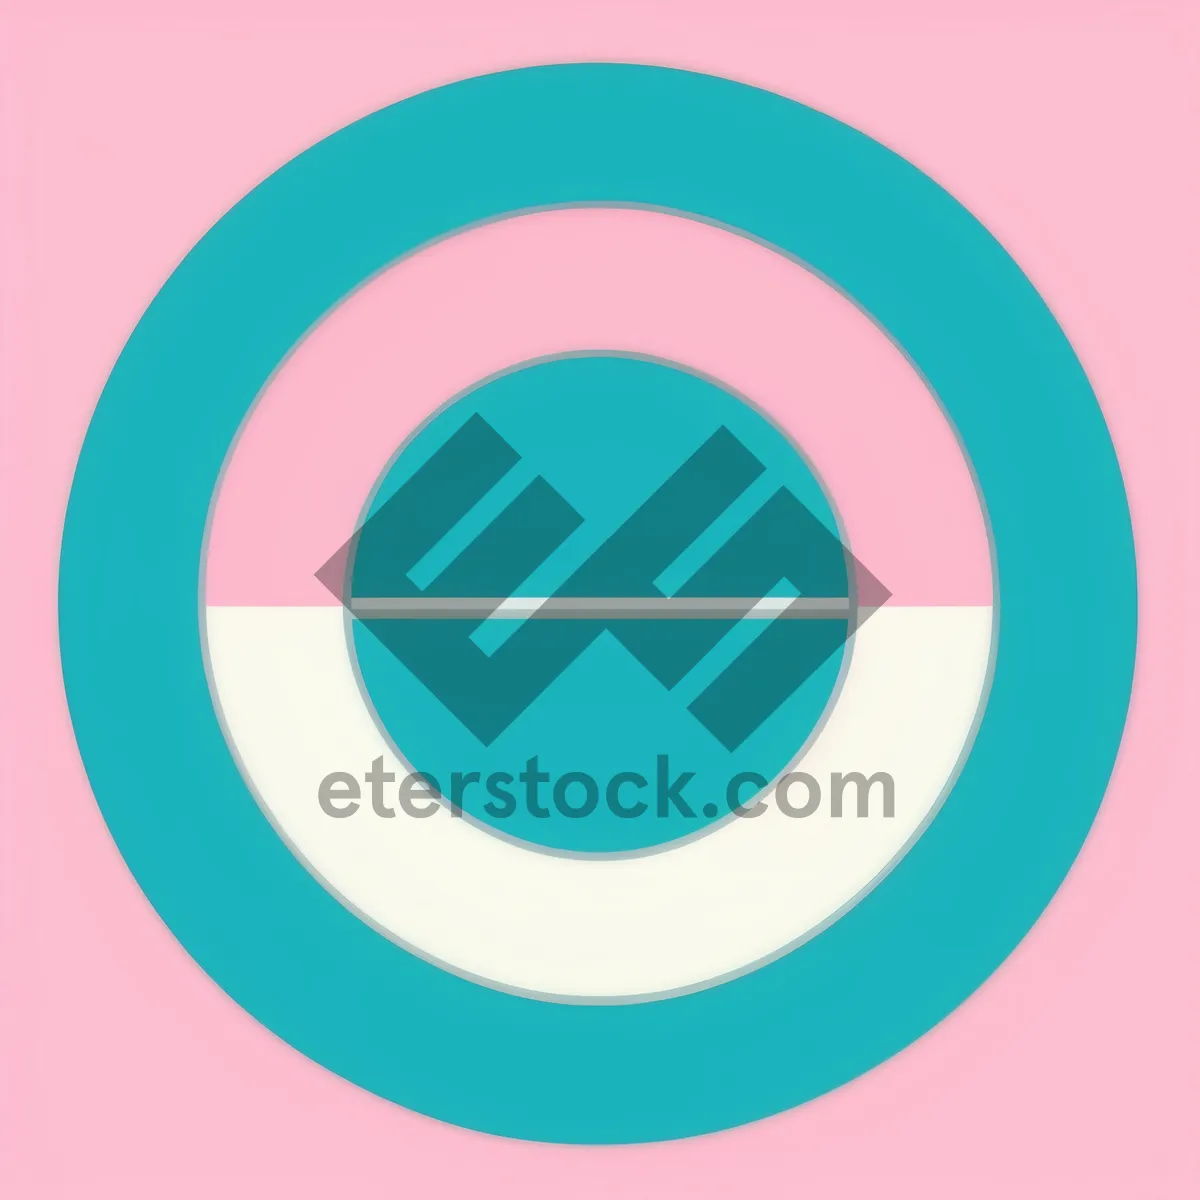 Picture of Icon of a glossy circle web button that emanates a polished and stylish impression